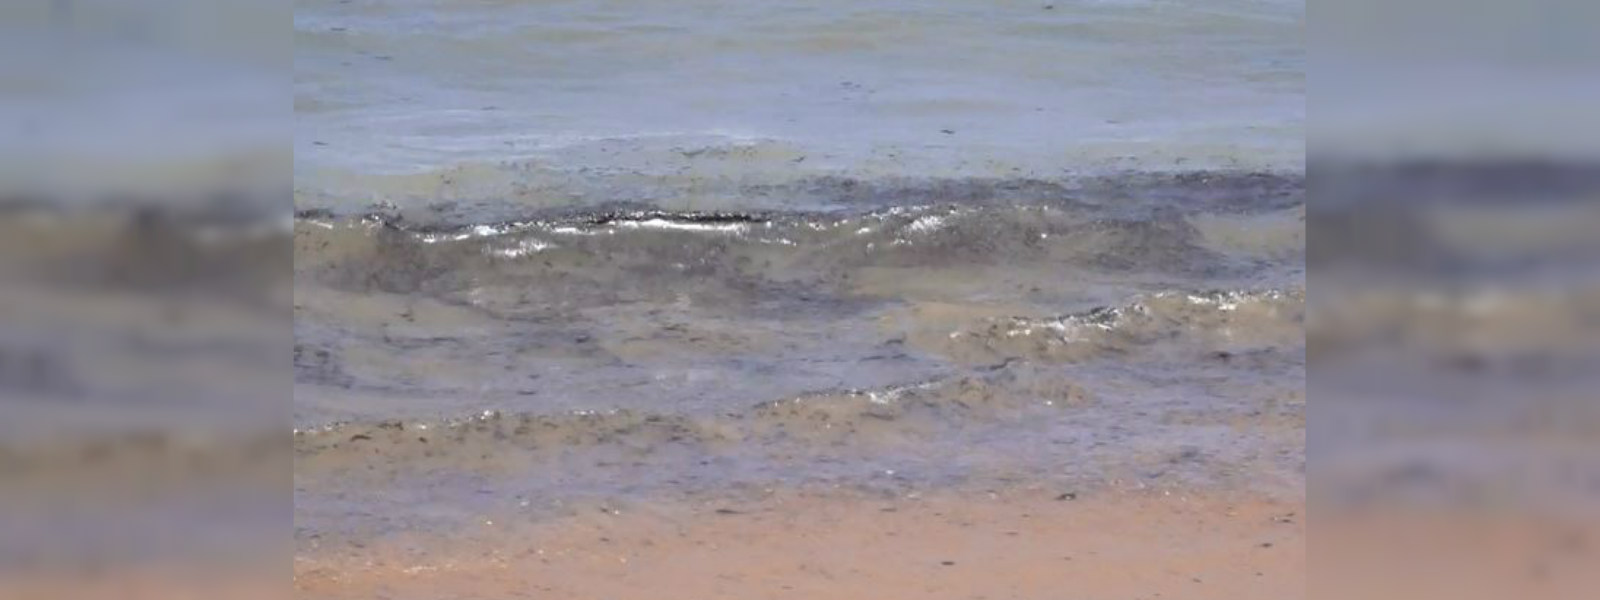 Black oil residue in Wellawatte and Mount Lavinia 